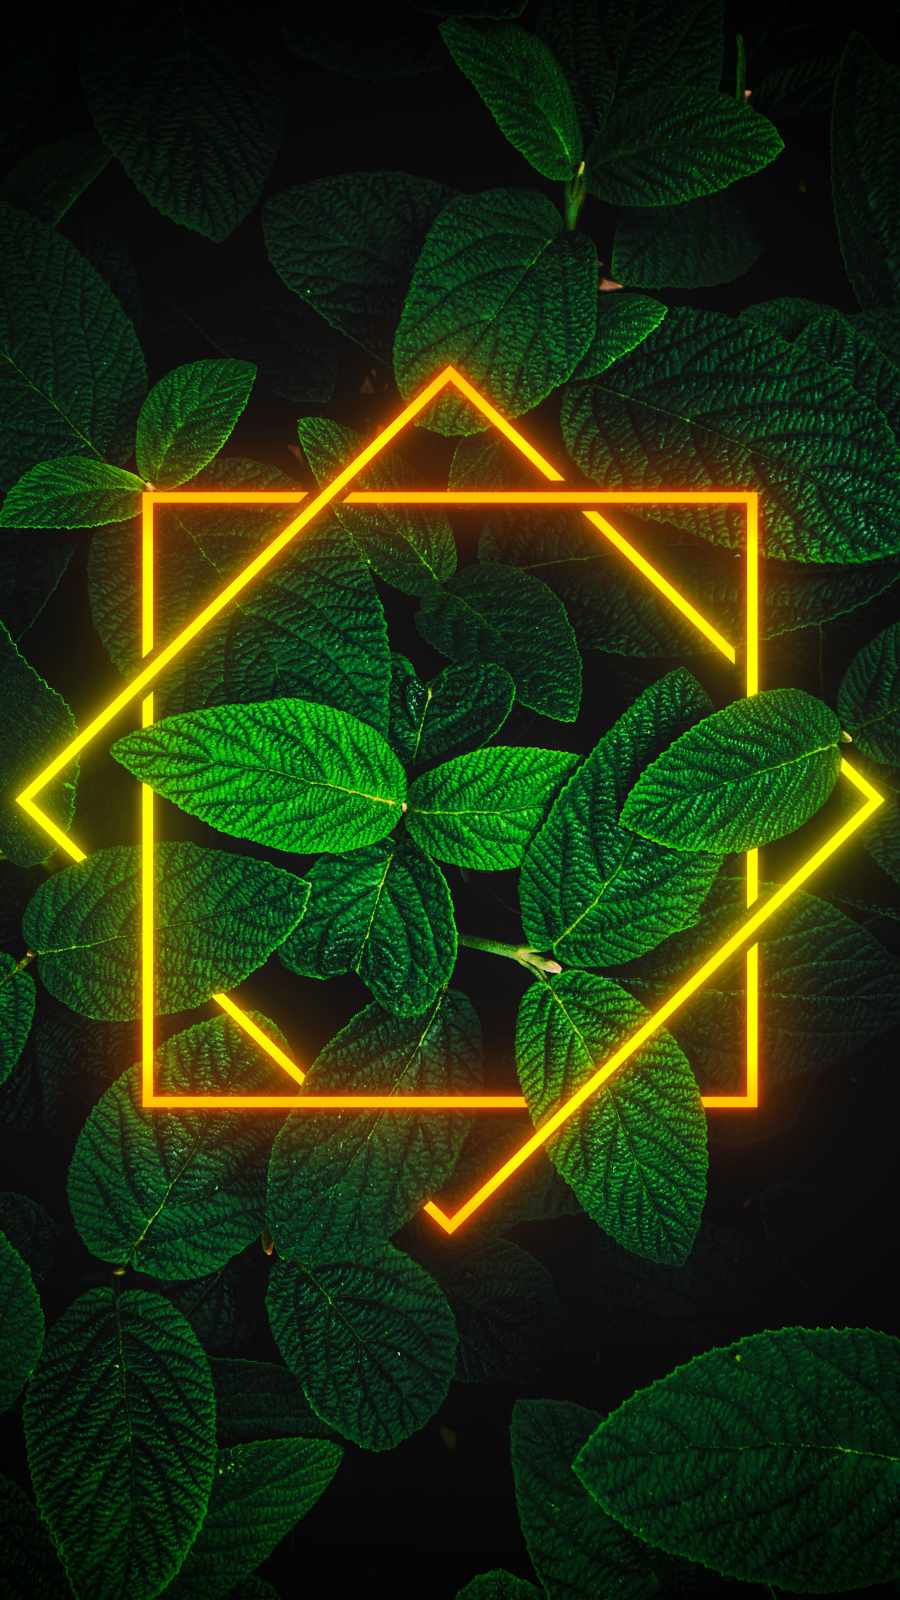 Neon Green Foliage Nature - IPhone Wallpapers : iPhone Wallpapers